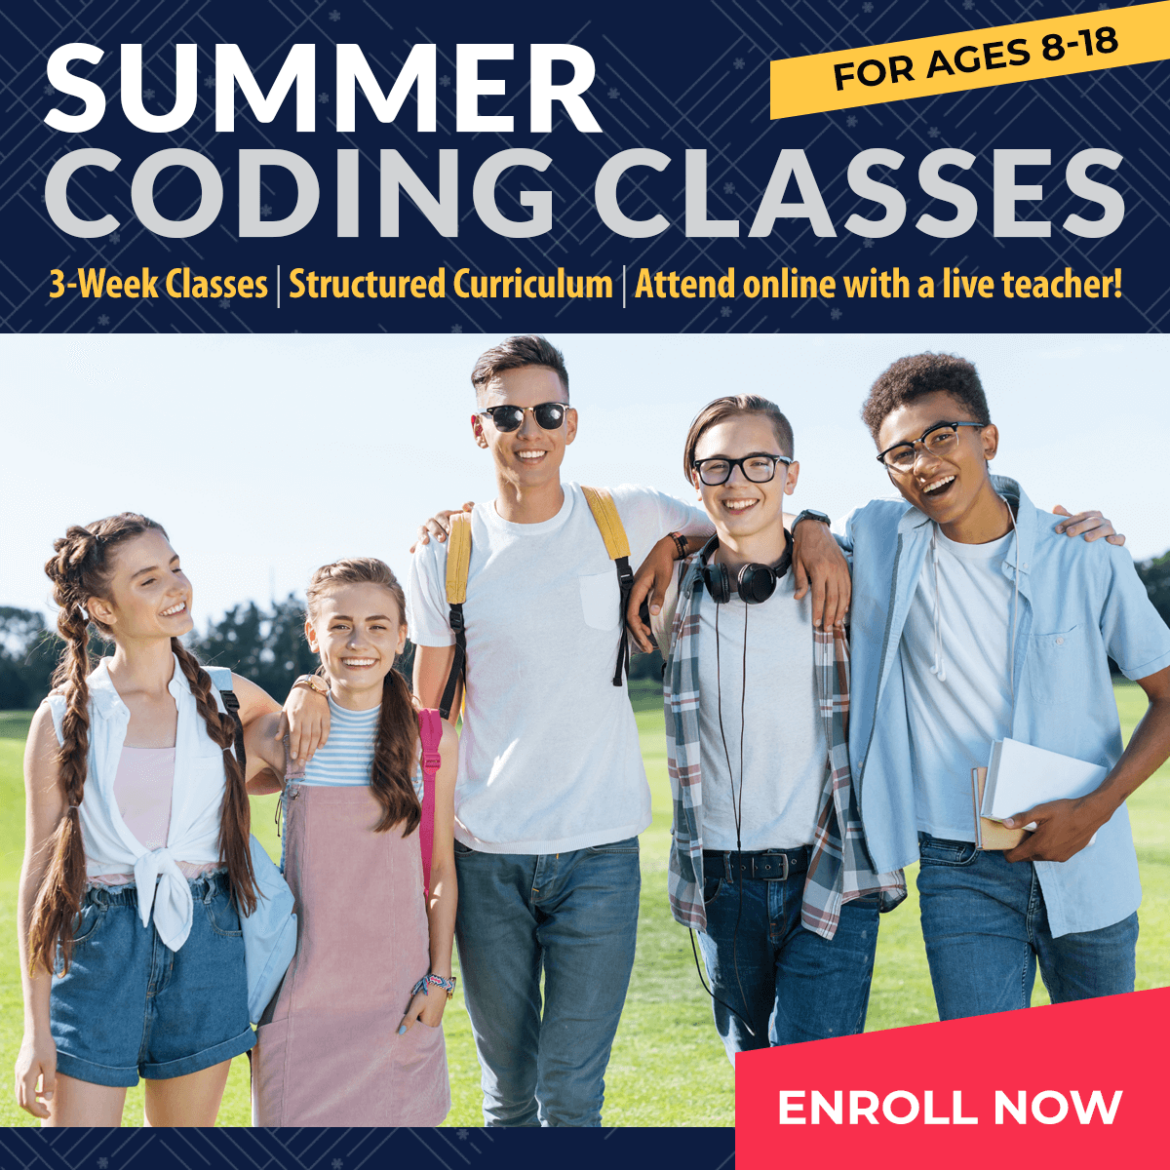 Summer Free & Fee Camp Coding Classes Are Enrolling Now